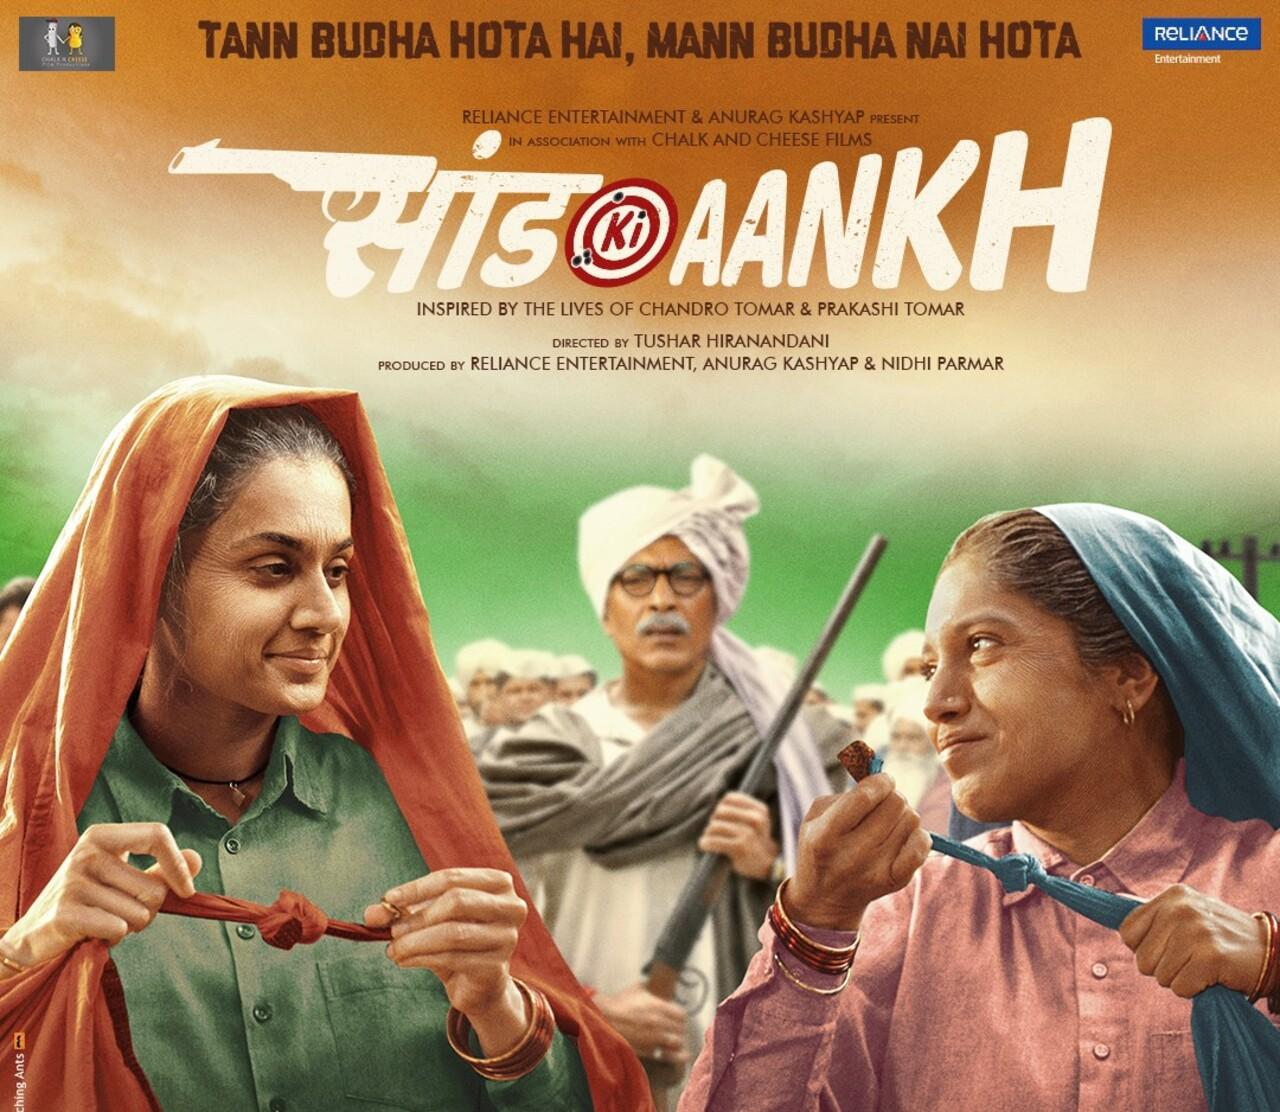 'Saand Ki Aankh,' starring Taapsee Pannu and Bhumi Pednekar, is based on the real-life story of sharpshooters Chandro and Prakashi Tomar. The two elderly women from Uttar Pradesh fought societal prejudices to become renowned competitive shooters